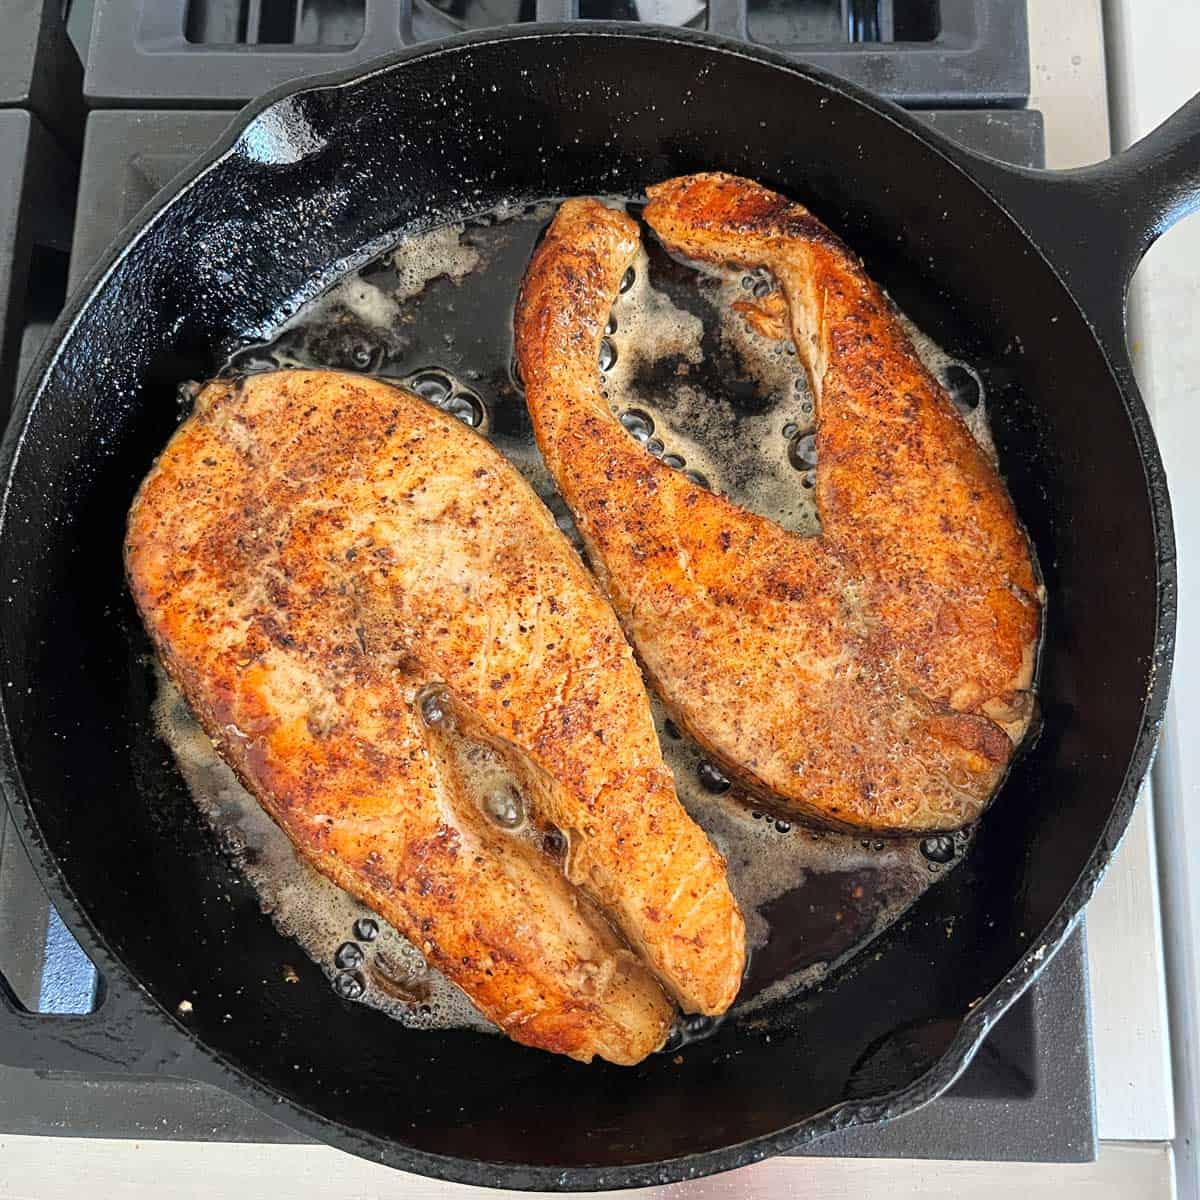 Two salmon steaks in the pan after they were flipped.